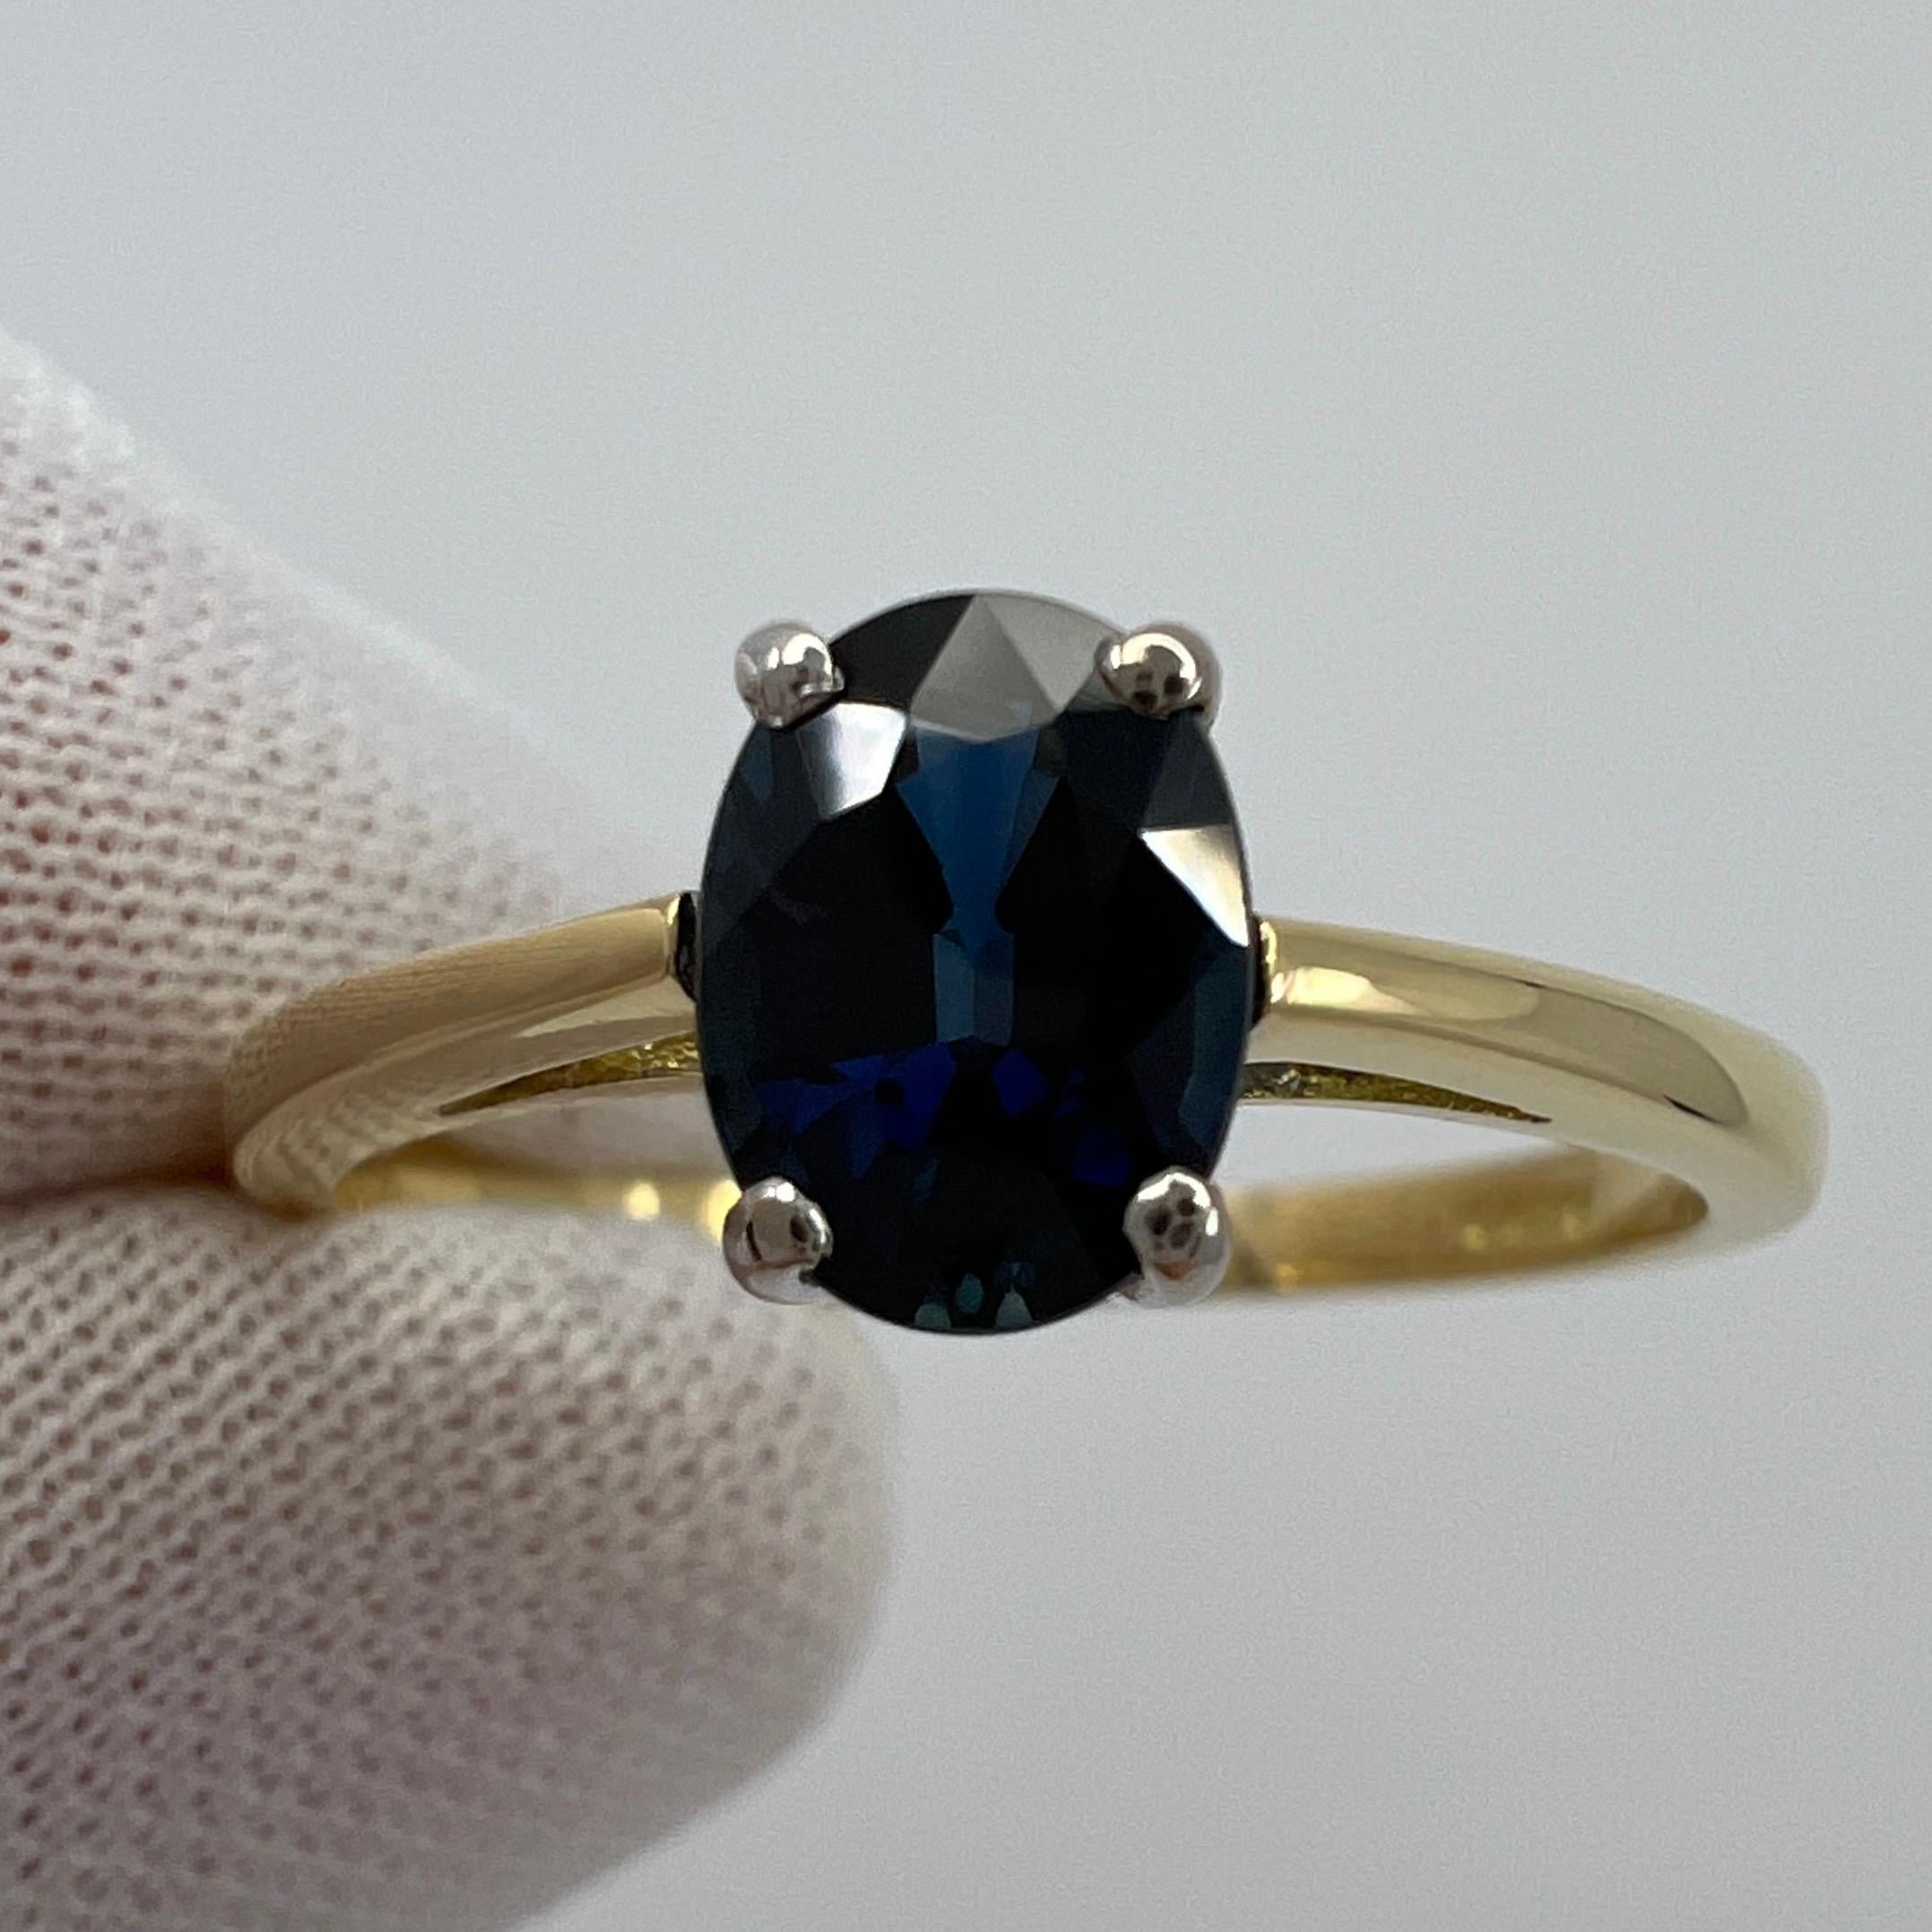 Natural Fine Blue Sapphire 18k White & Yellow Gold Solitaire Ring.

1.13 Carat stone with a stunning deep teal blue colour with excellent clarity, a very clean stone. 

This sapphire also has an excellent oval cut which shows lots of sparkle and